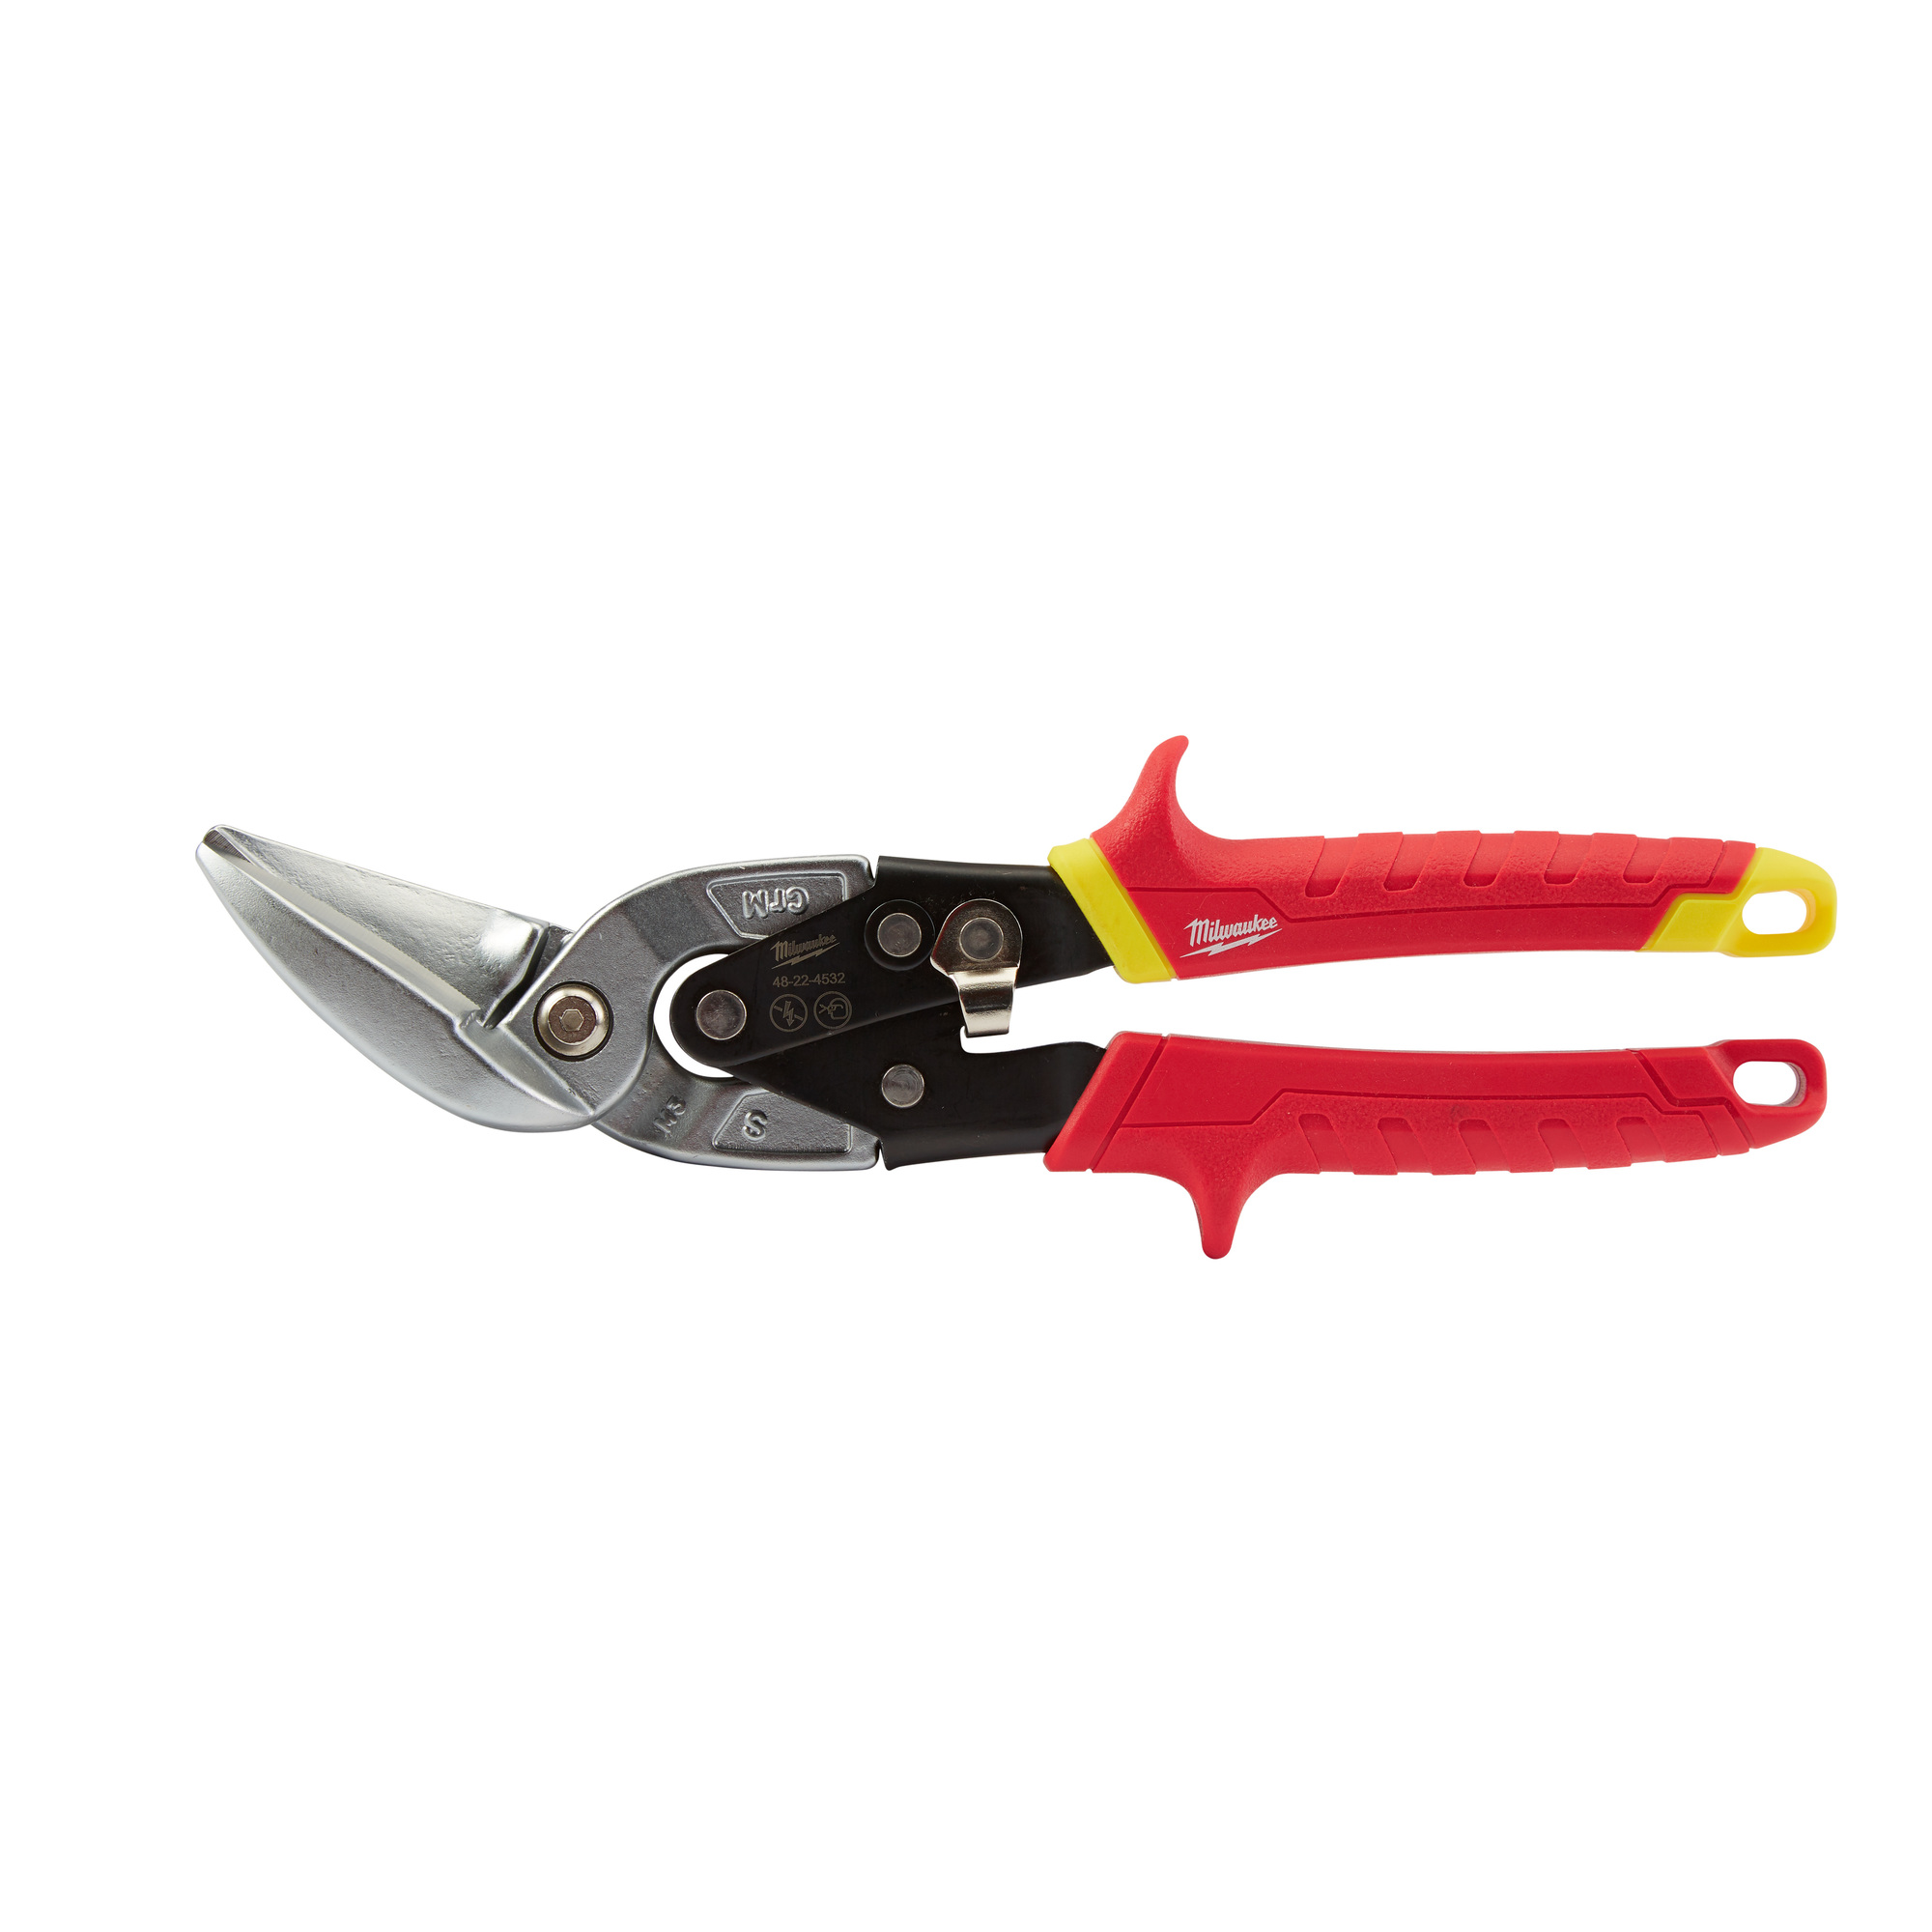 Milwaukee, Straight Cutting Offset Aviation Snips, Blade Size 5 in, Tool Length 11.3 in, Model 48-22-4532